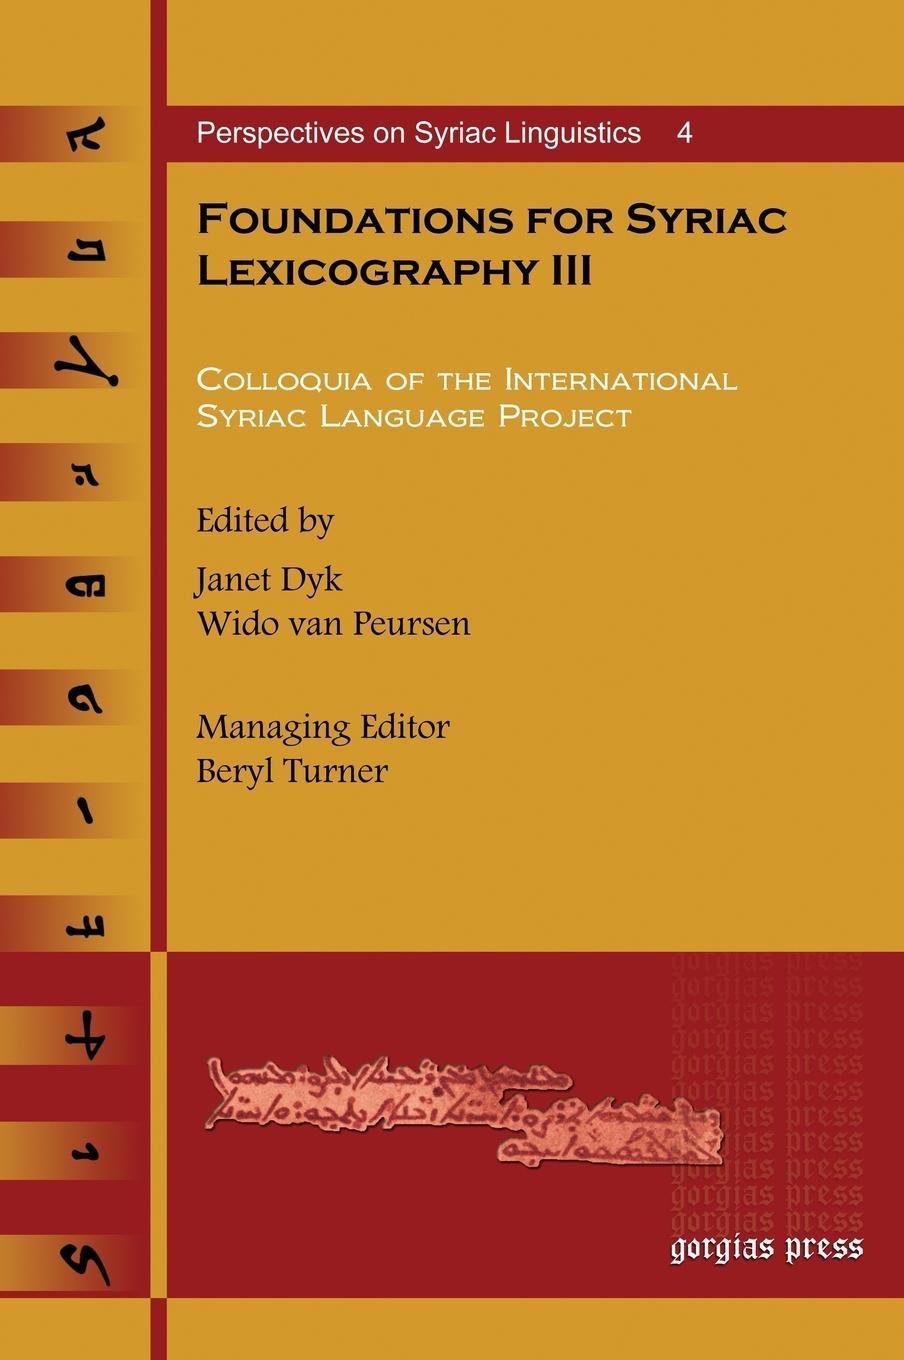 Foundations for Syriac Lexicography III - Janet Dyk